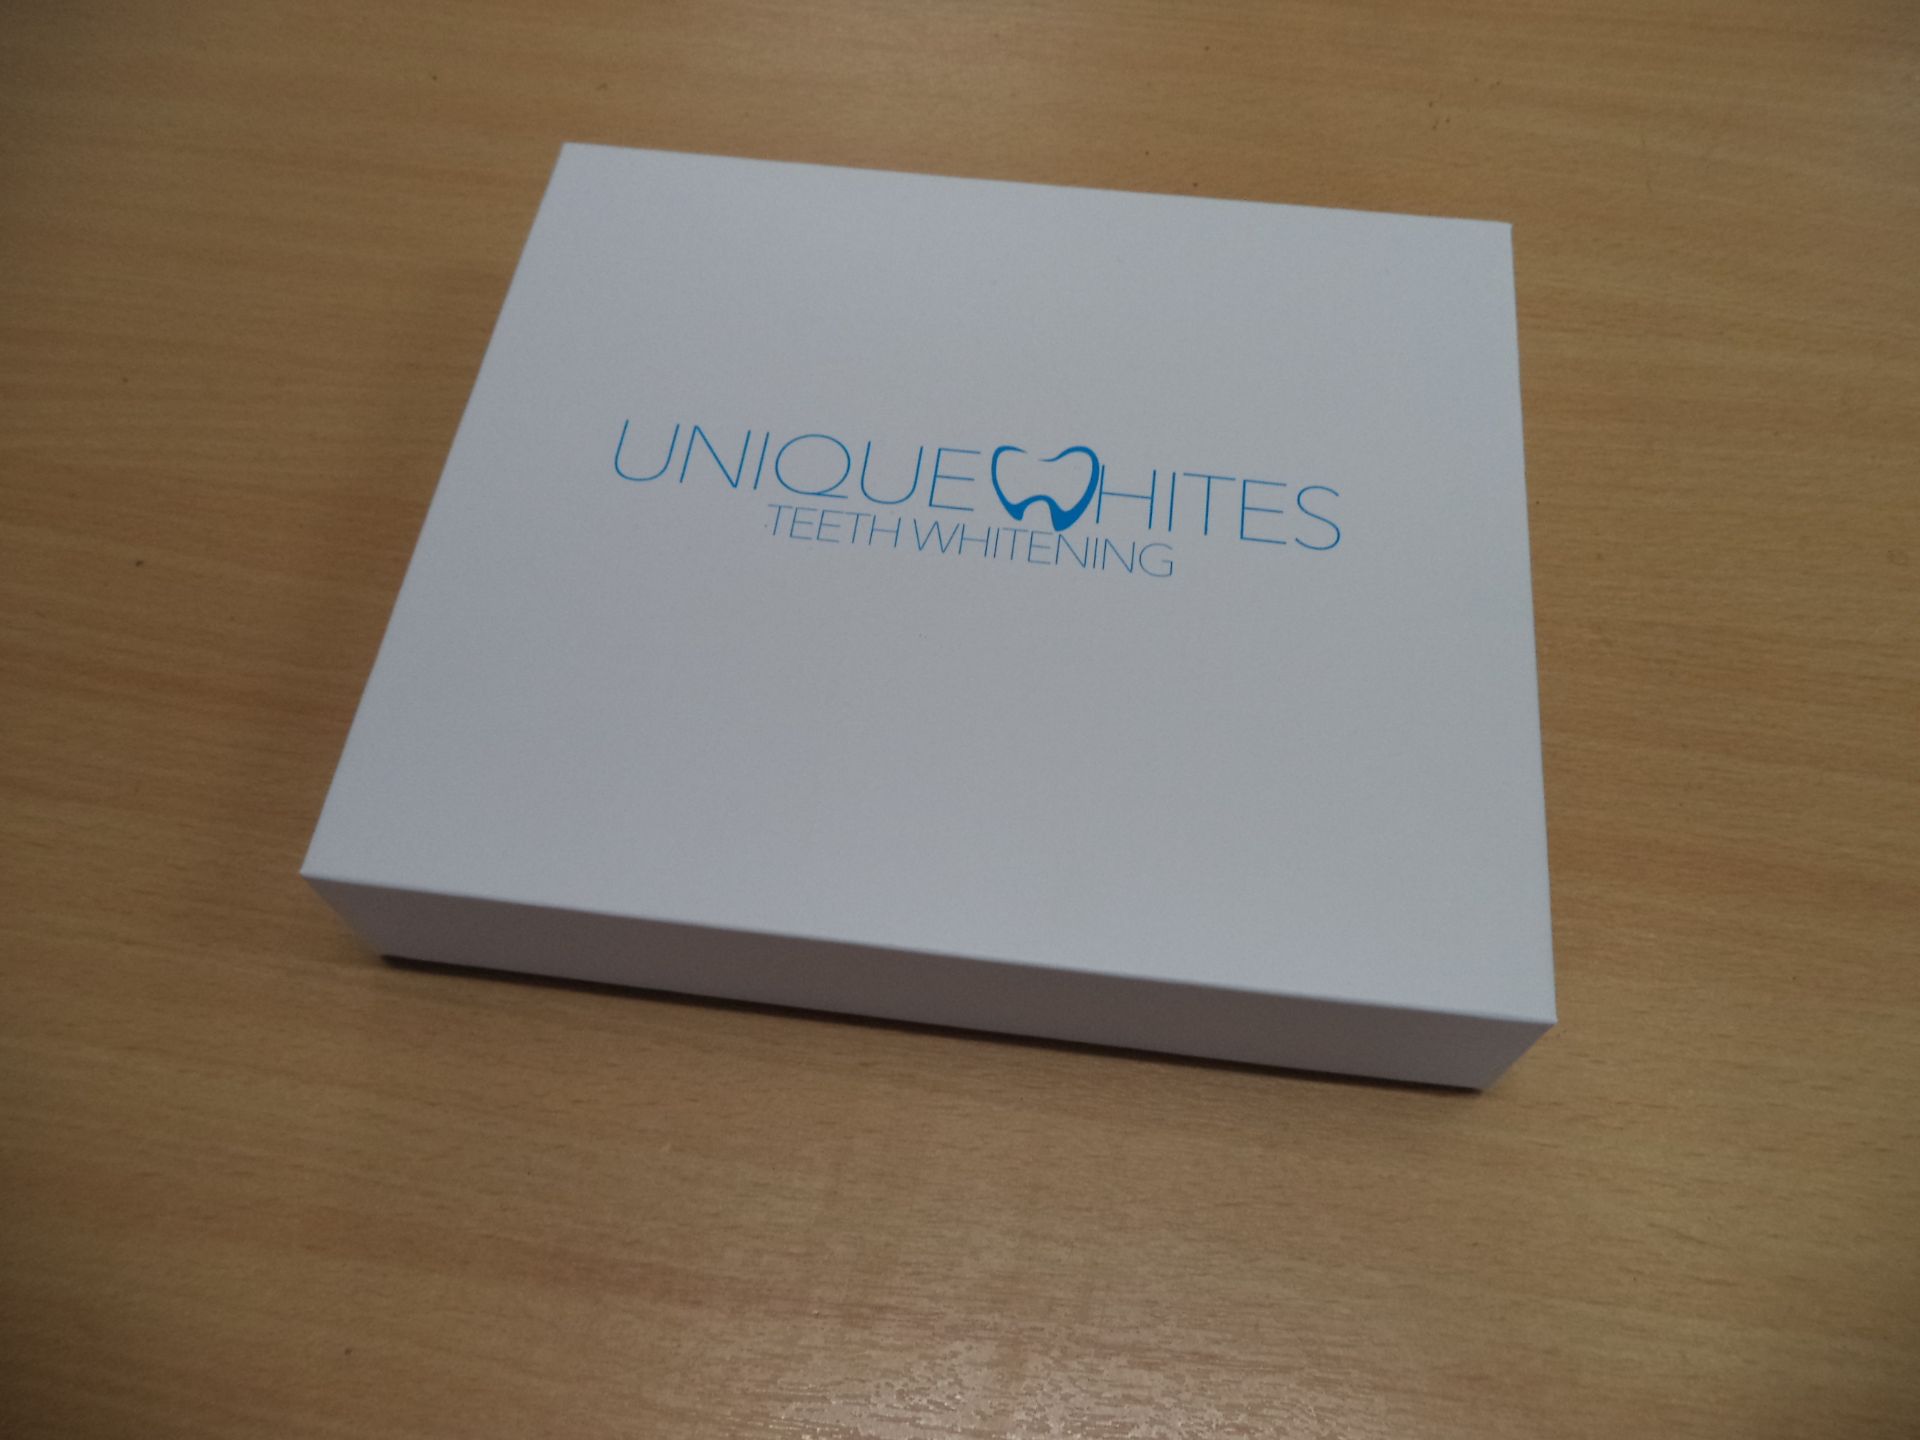 40 off (one large carton) Unique Whites teeth whitening kits, each in a retail display box with - Image 9 of 9